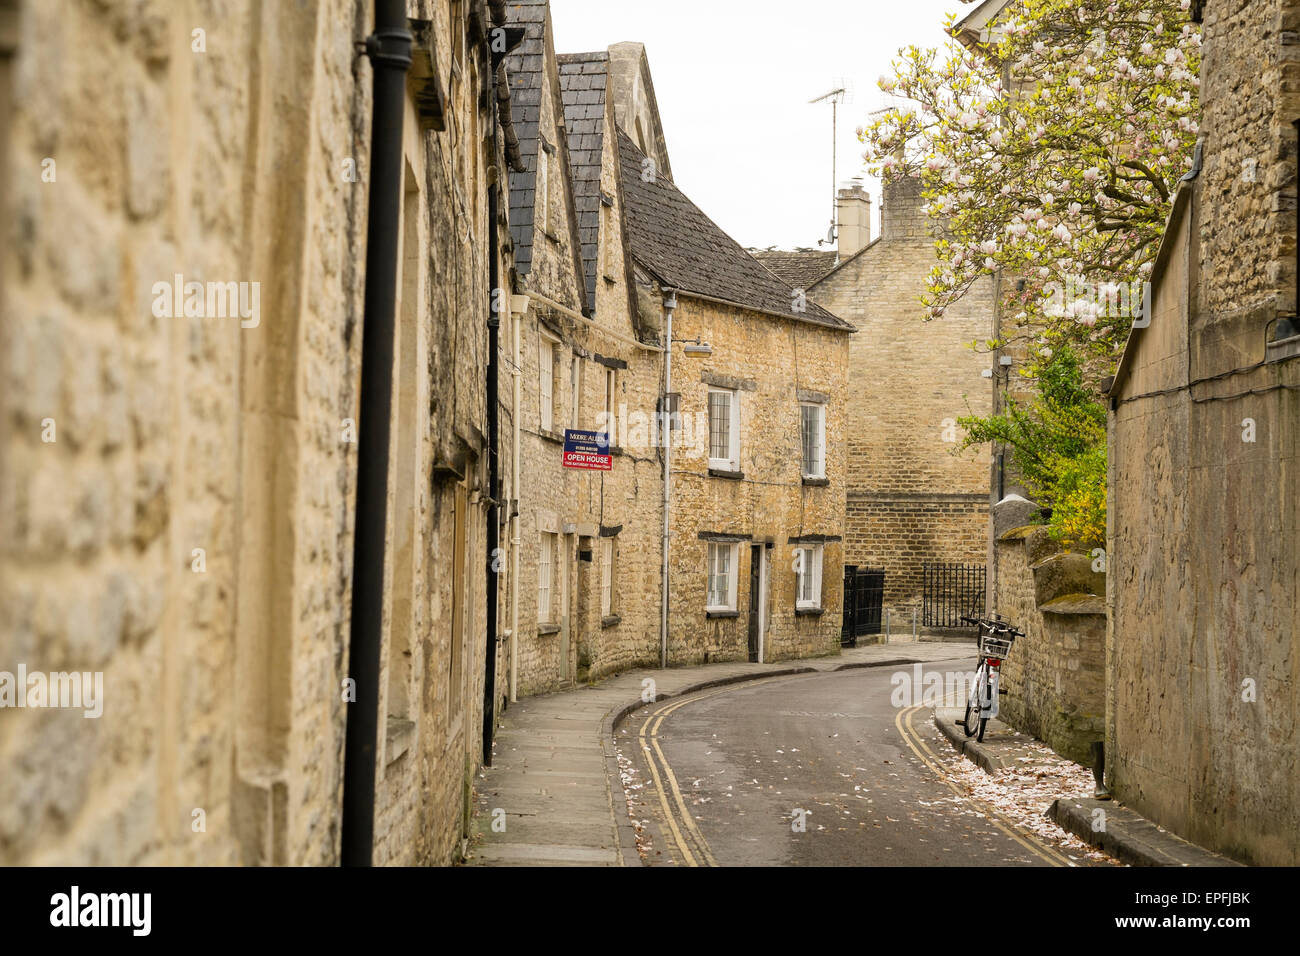 Rows of typical Cotswold mellow yellow sandstone houses in the narrow quaint Coxwell Street , one of the most sought-after addresses in Cirencester, Gloucestershire, England UK Stock Photo